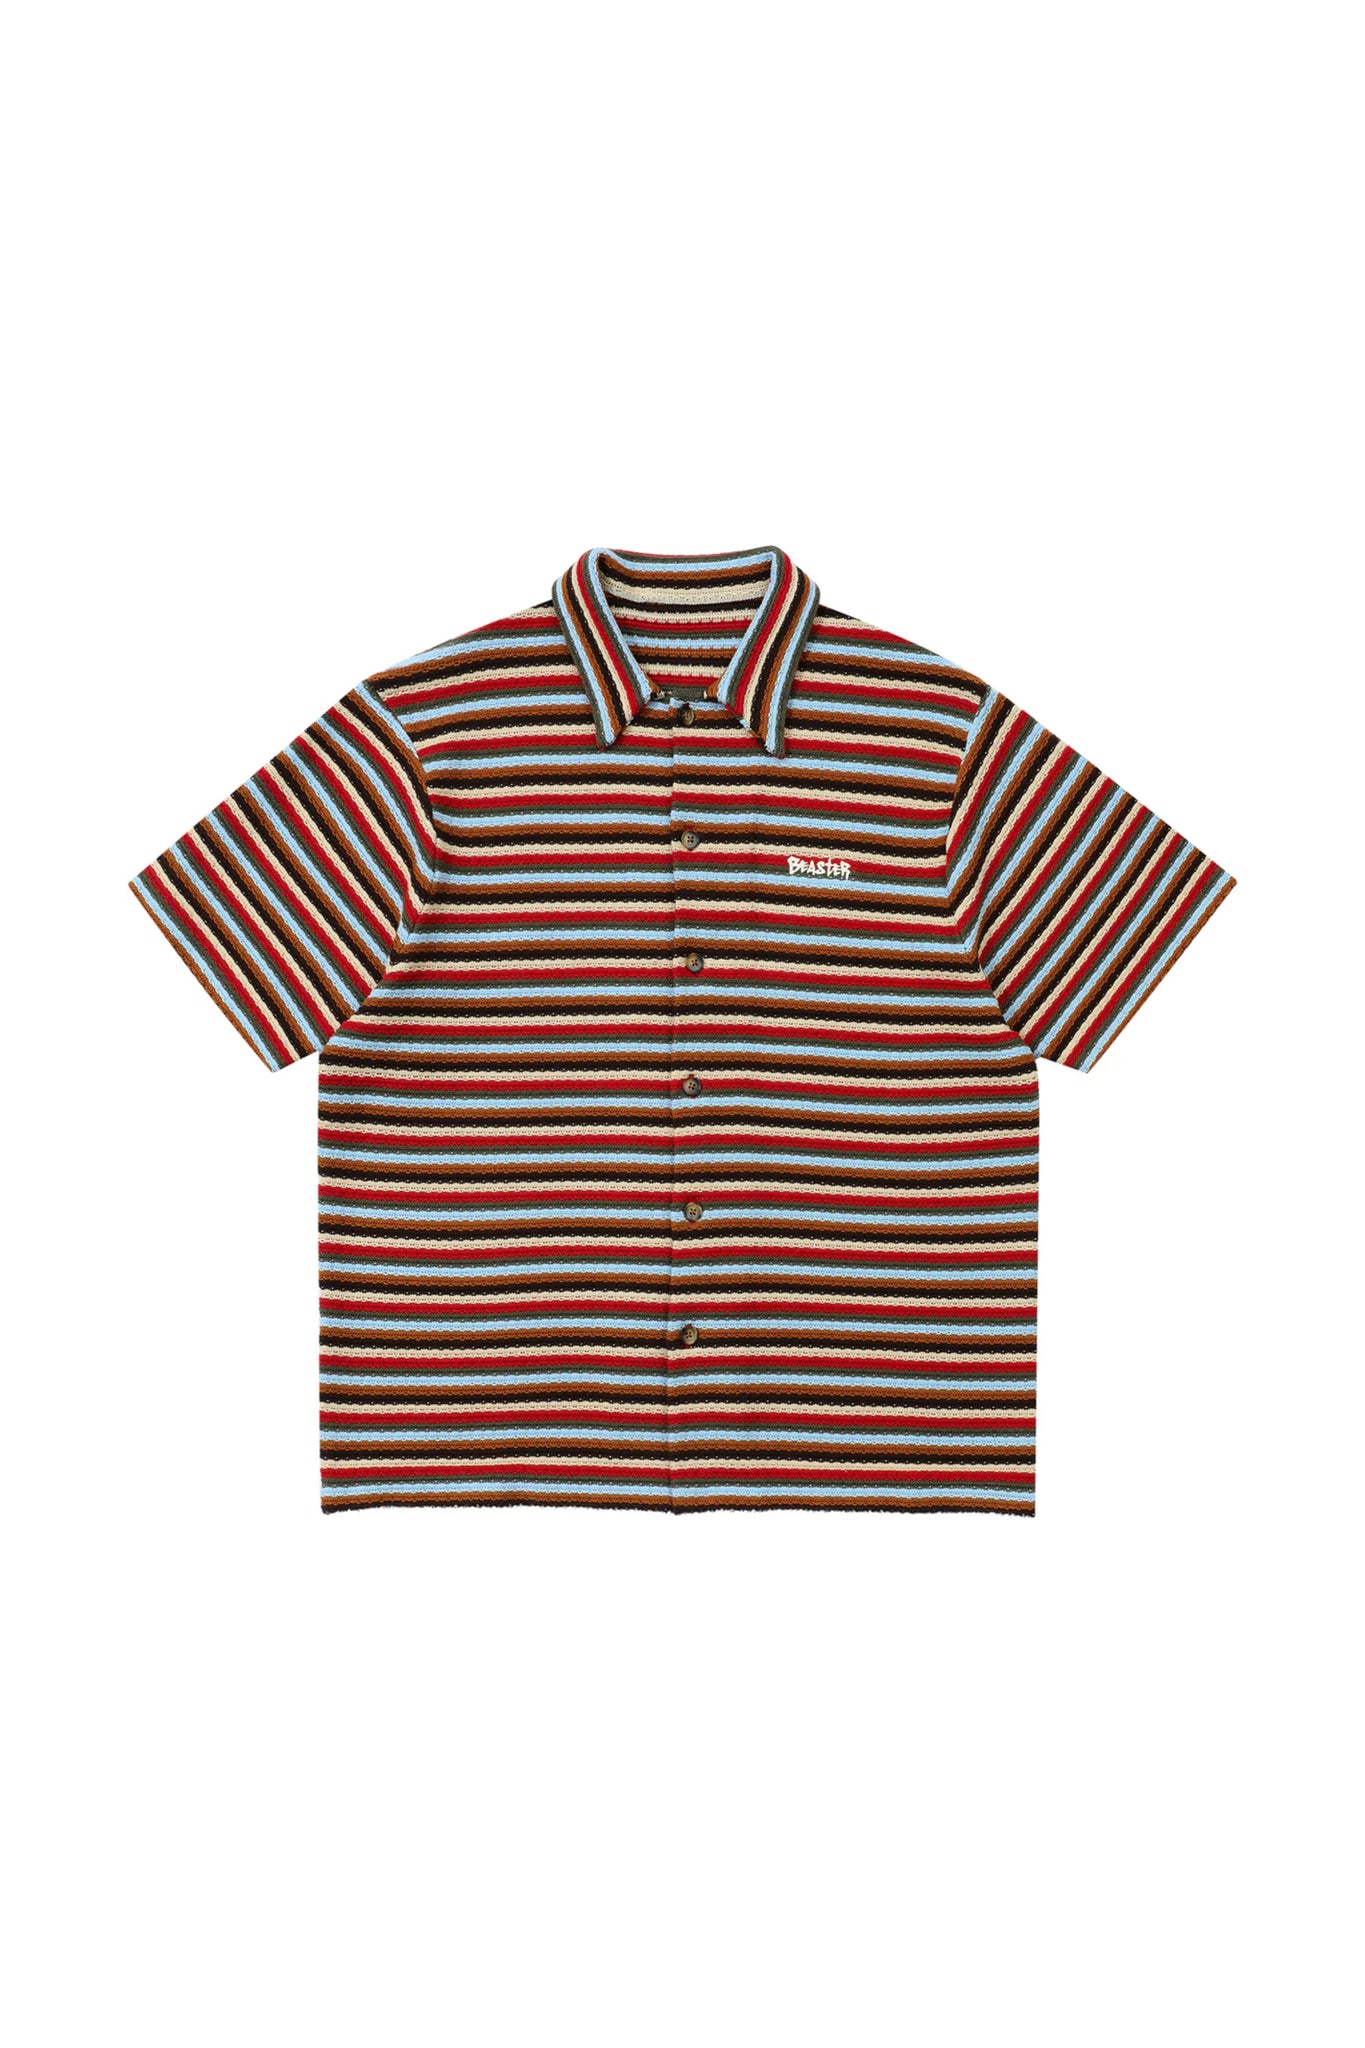 BEASTER Striped Button Knitted Retro Lazy Polo Shirt